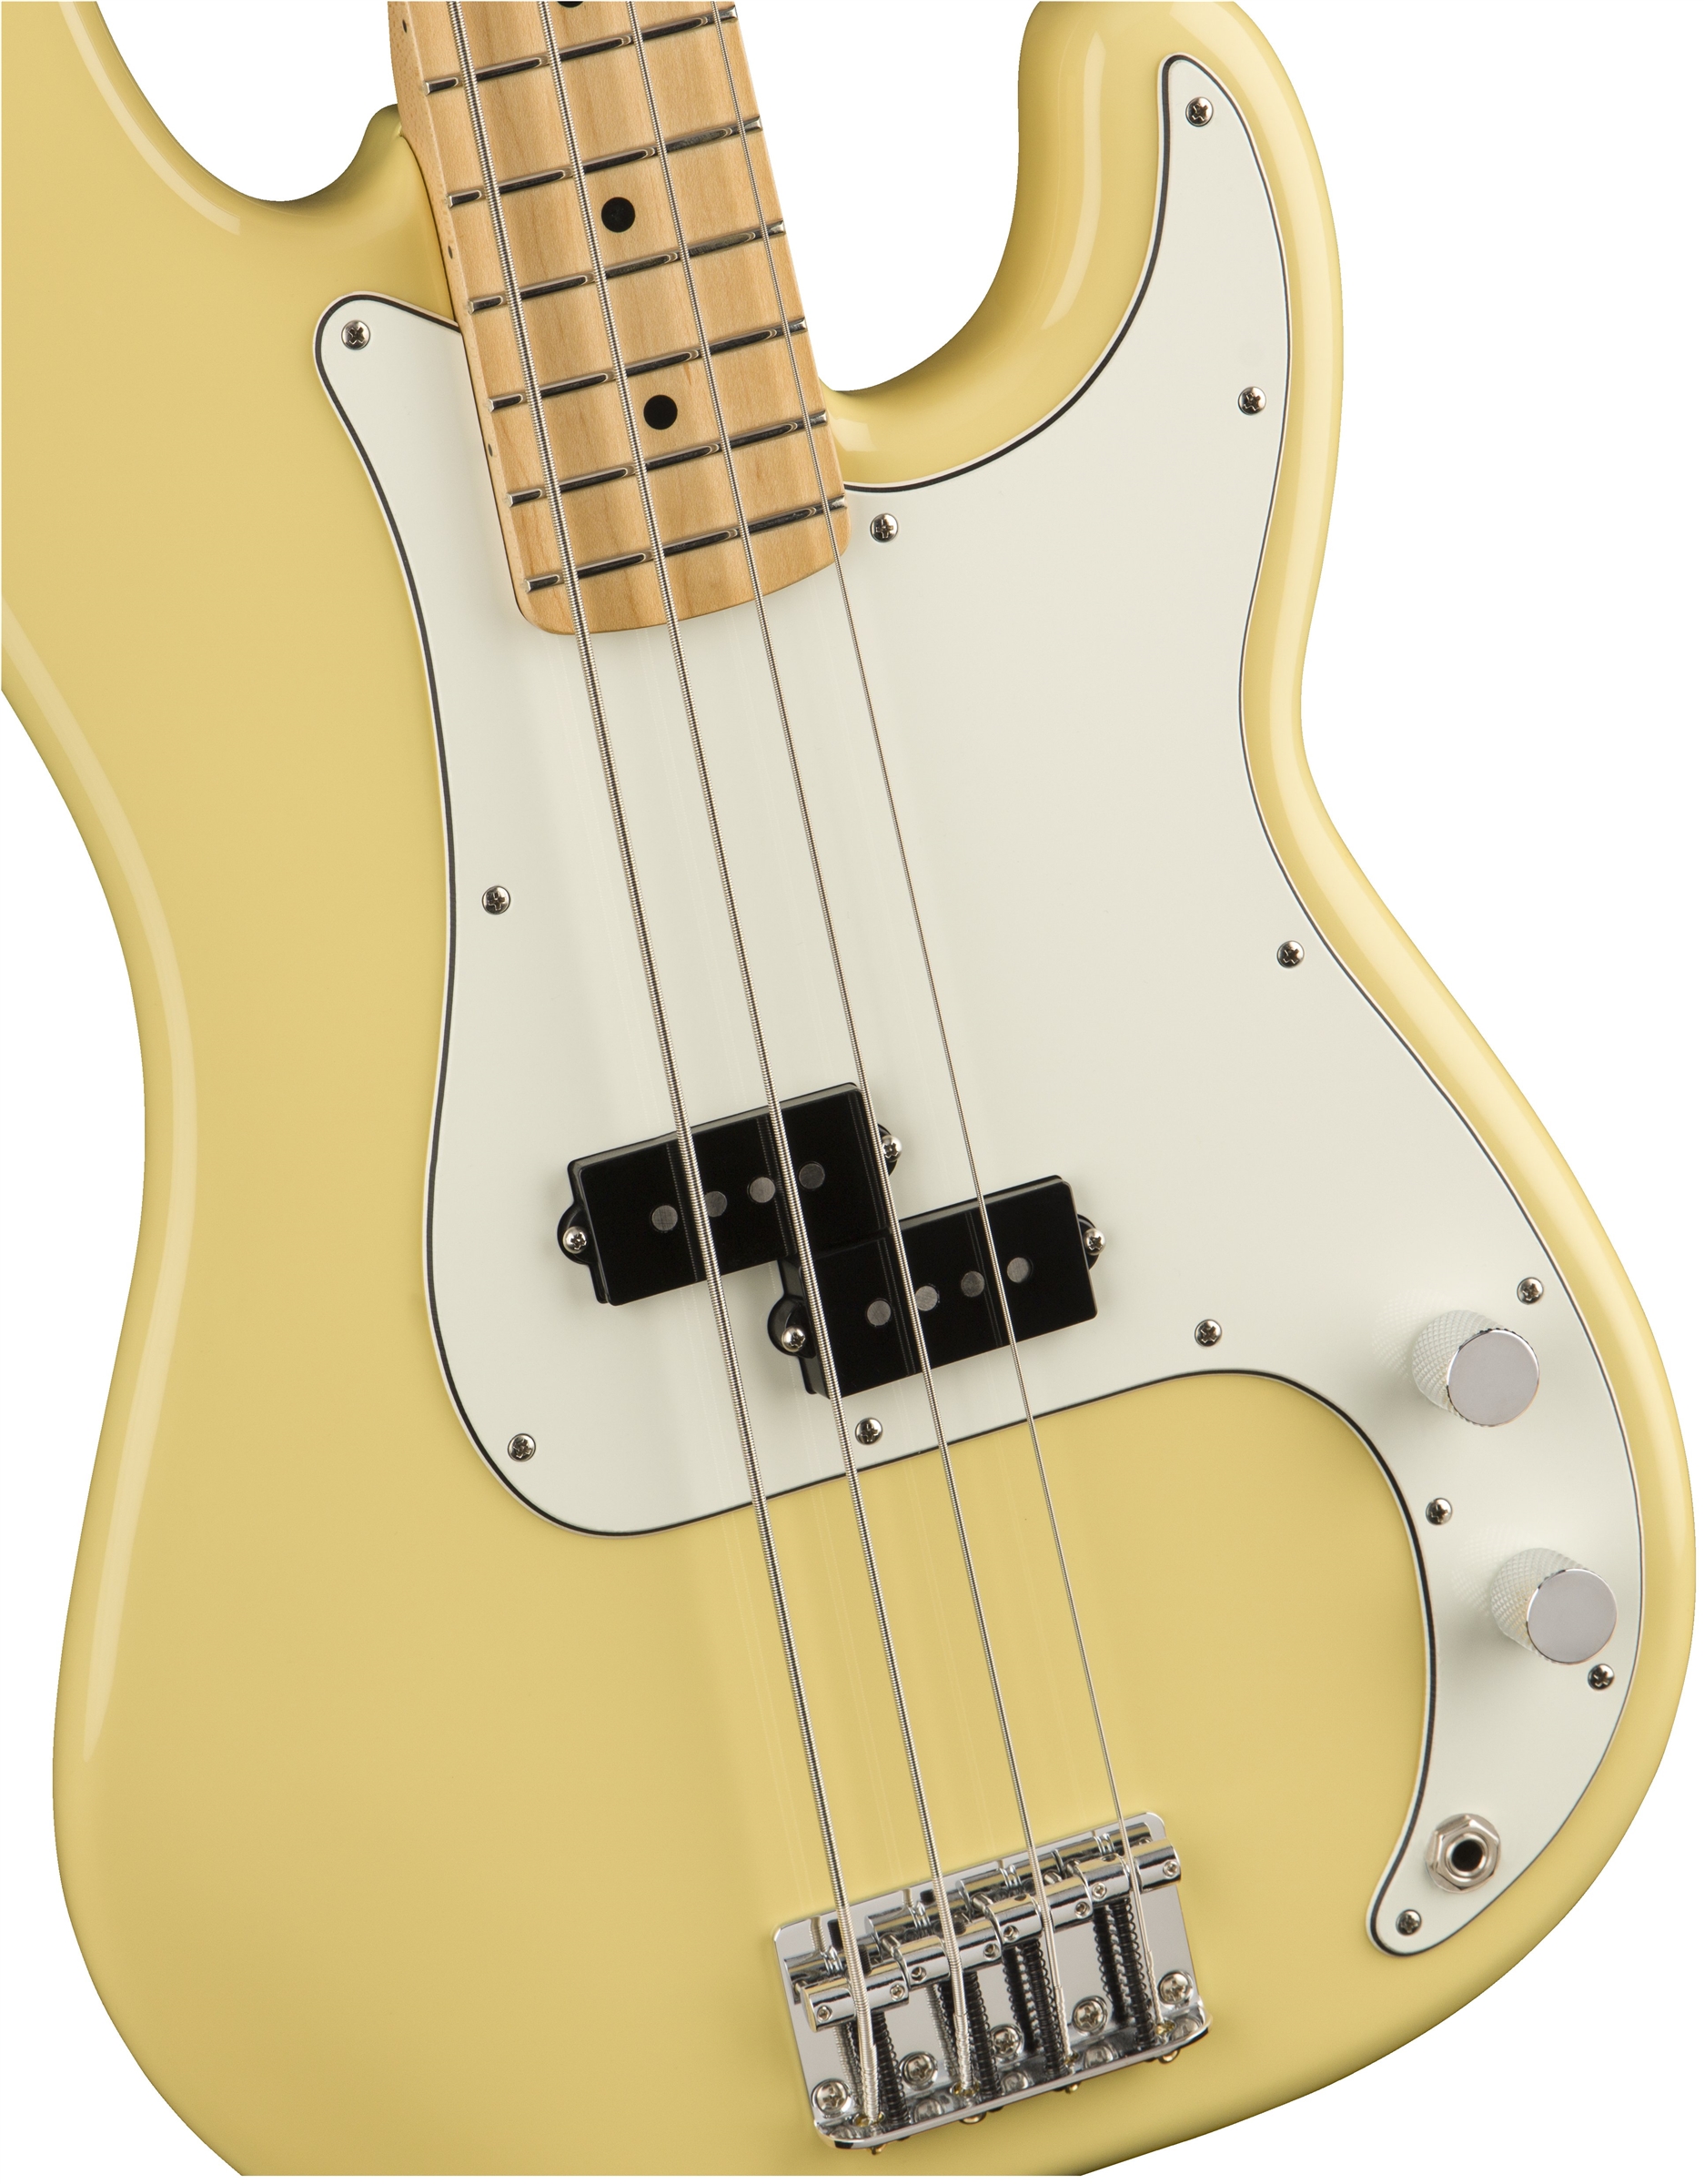 Fender Precision Bass Player Mex Mn - Buttercream - Solid body electric bass - Variation 2